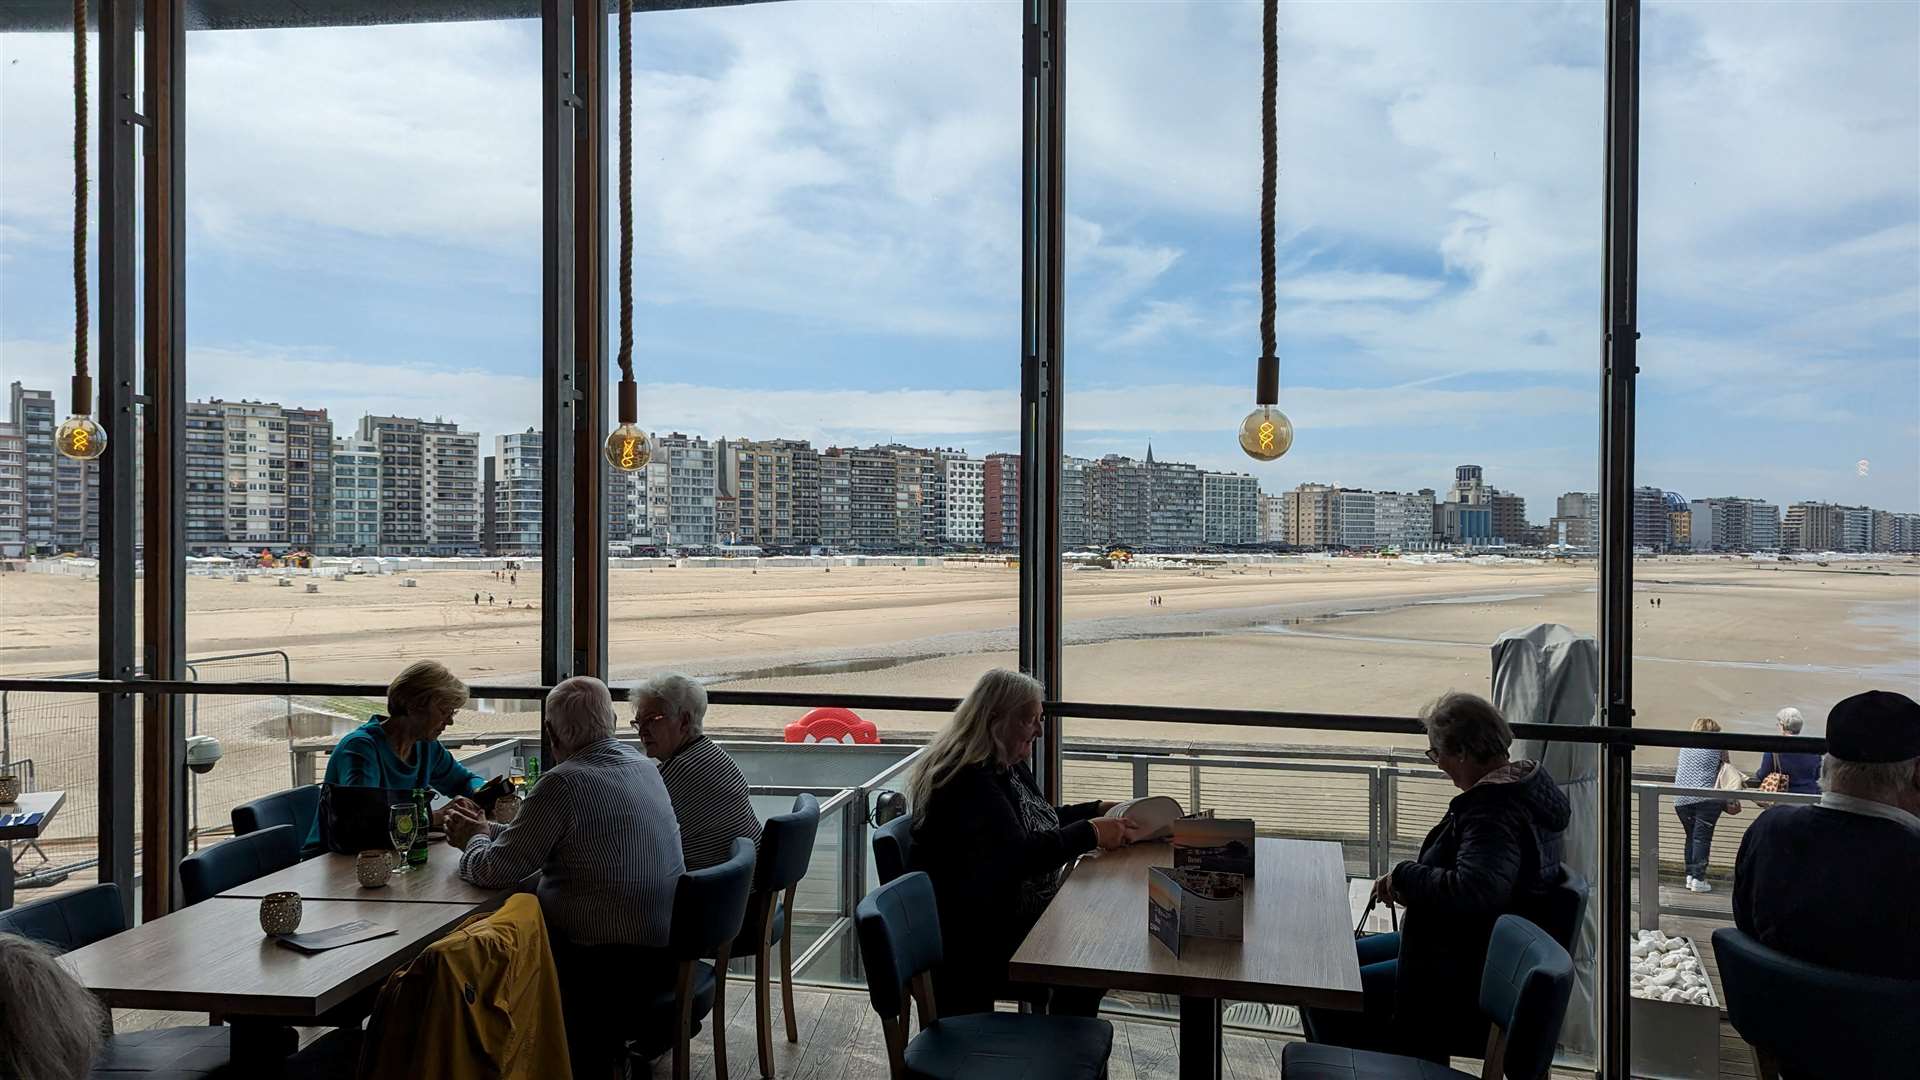 The view from the brasserie at the end of the Belgium Pier in Blankenberge